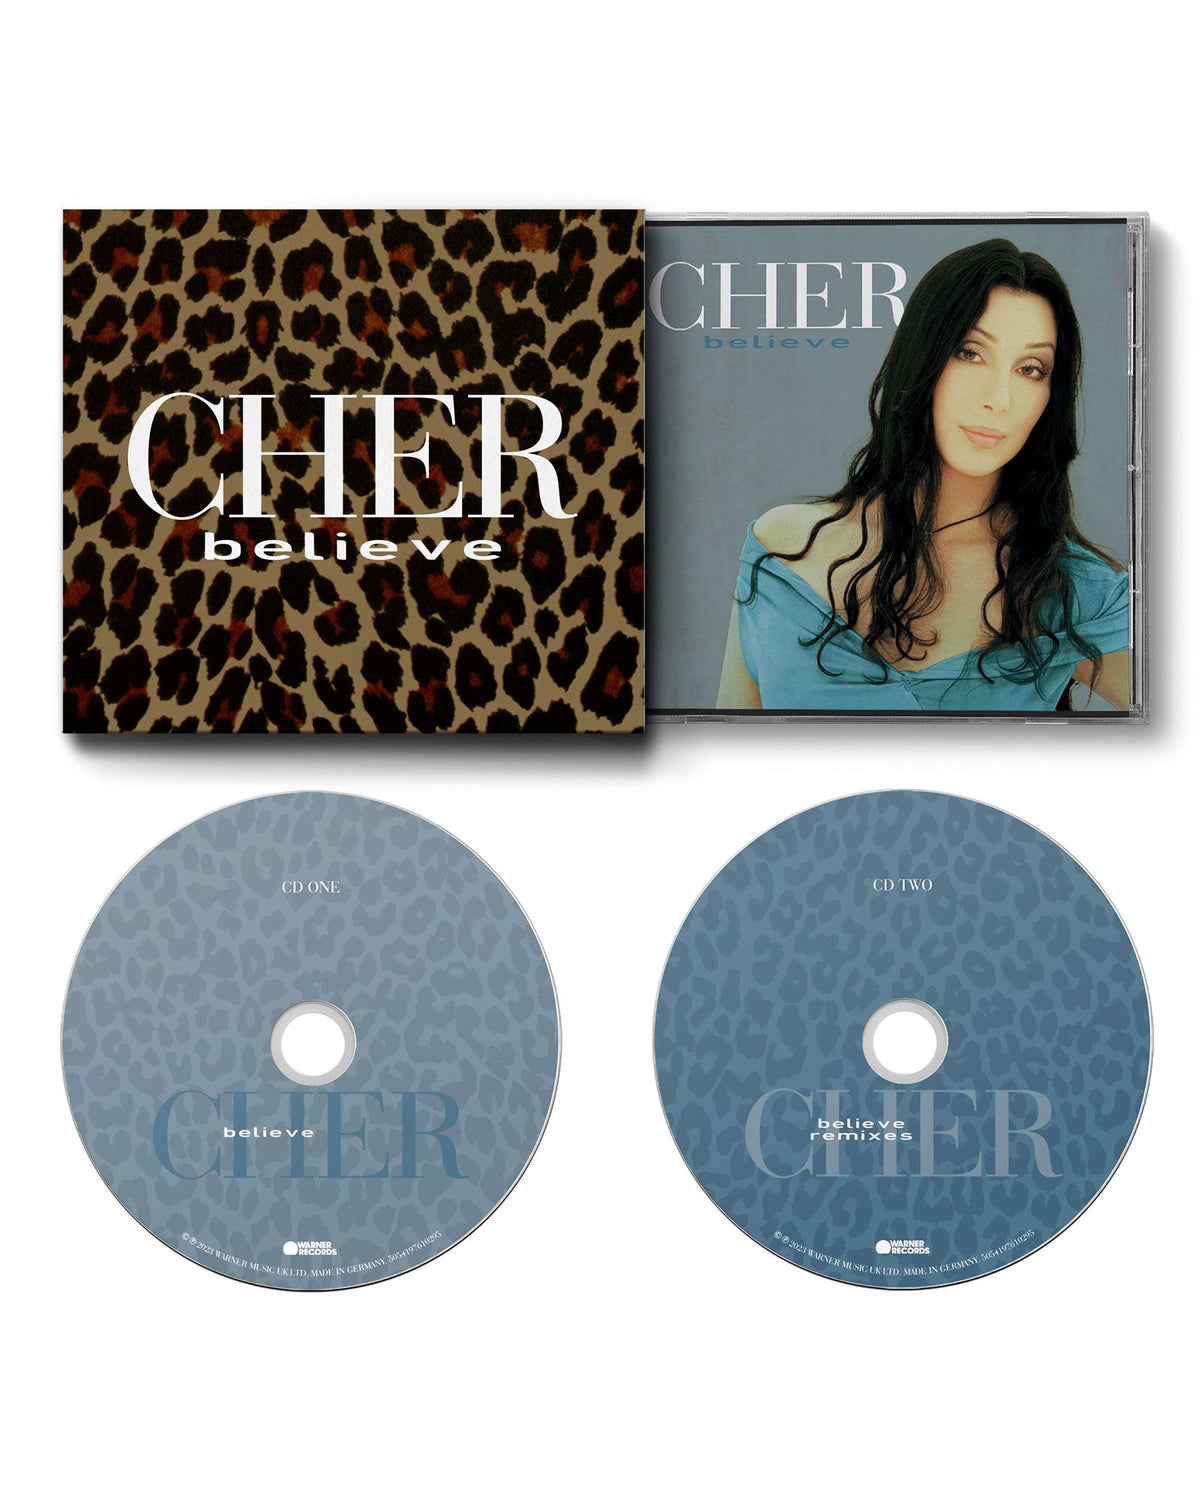 Cher - 2CD "Believe (25th Anniversary Deluxe Edition)" - D2fy · Rocktud - D2fy